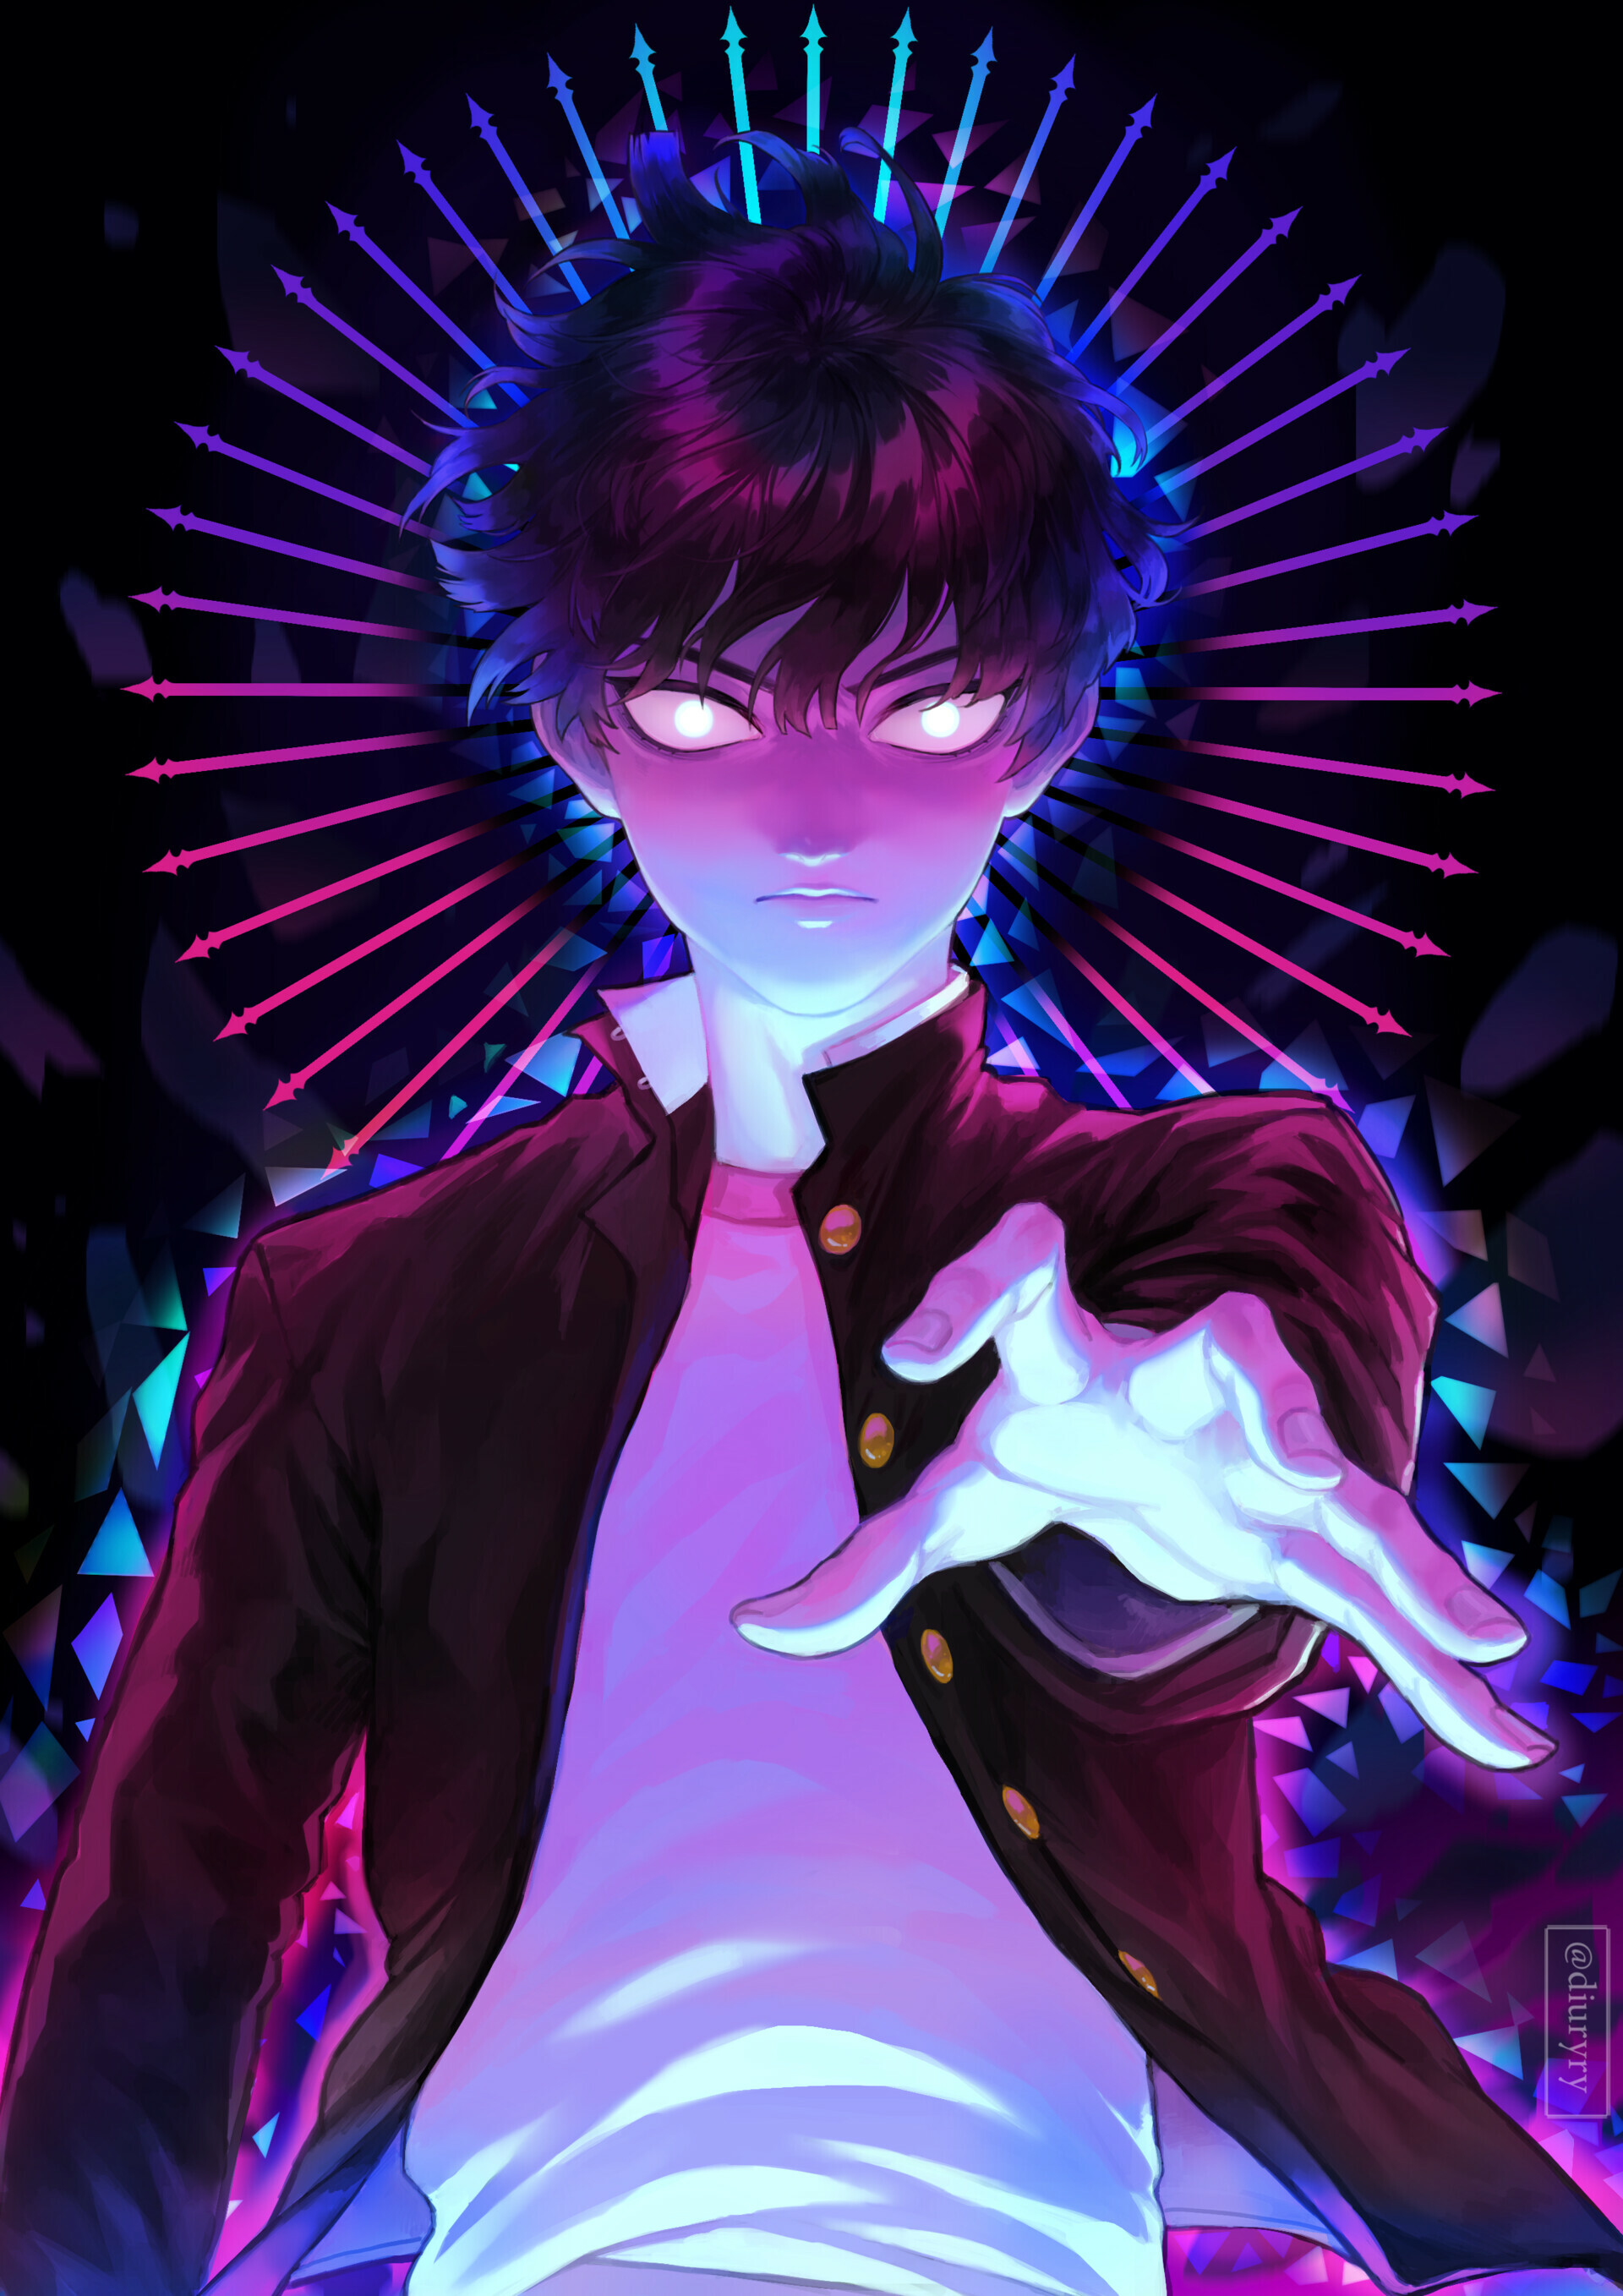 Mob Psycho 100: The anime adaptation, Considered one of the best anime series of the 2010s. 1920x2720 HD Wallpaper.